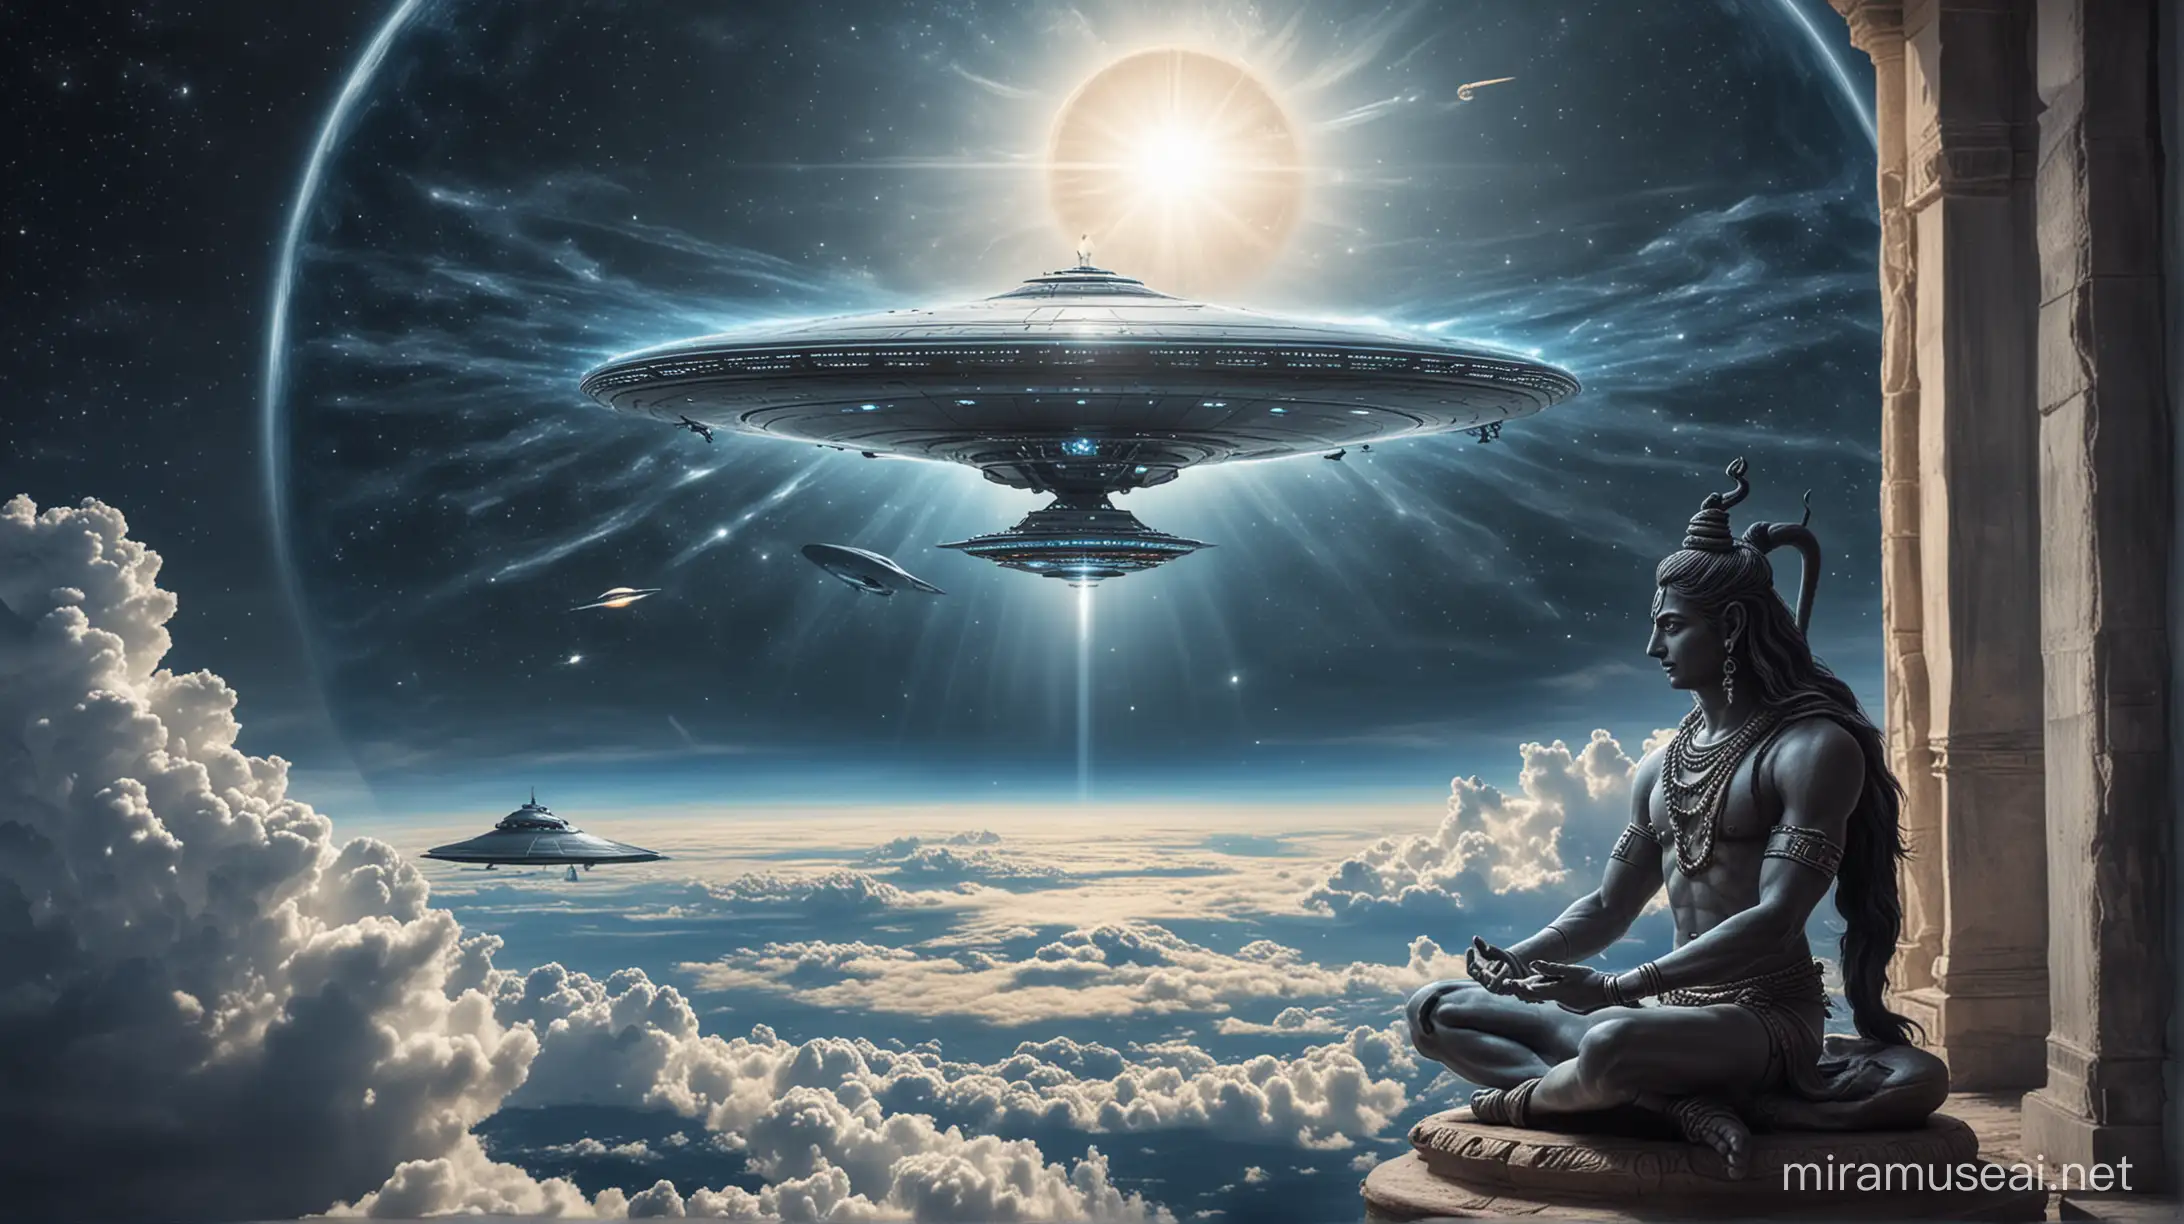 Lord Shiva Piloting UFO and Observing Earth